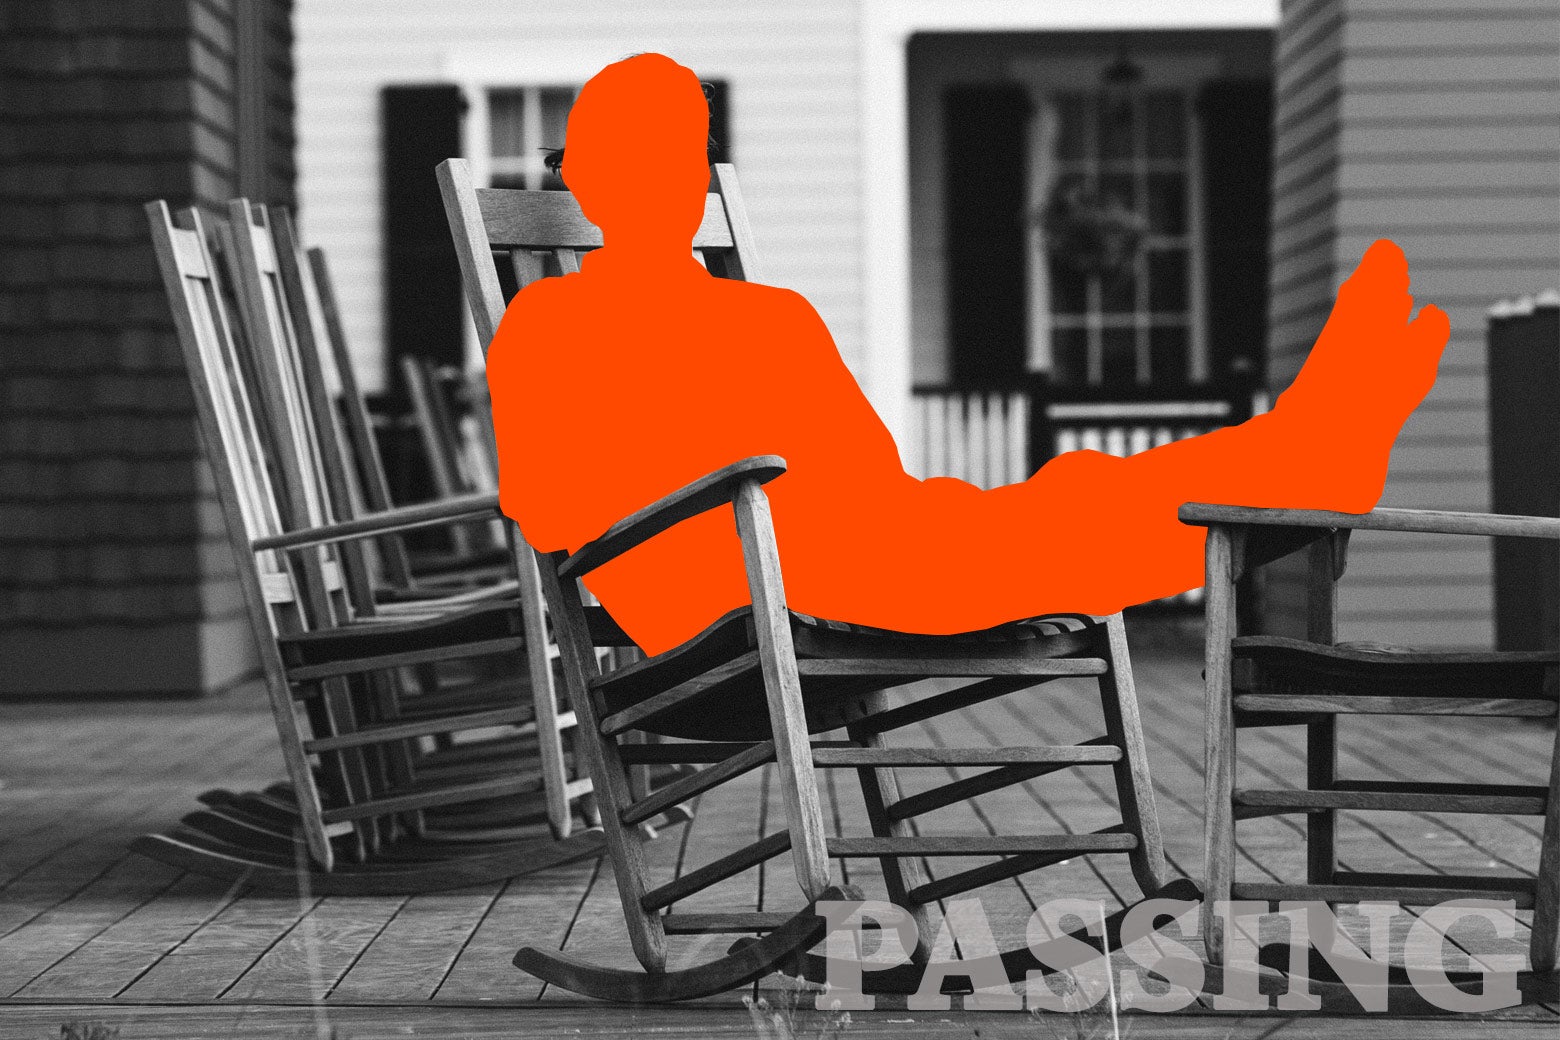 A man sitting on a rocking chair on a porch.